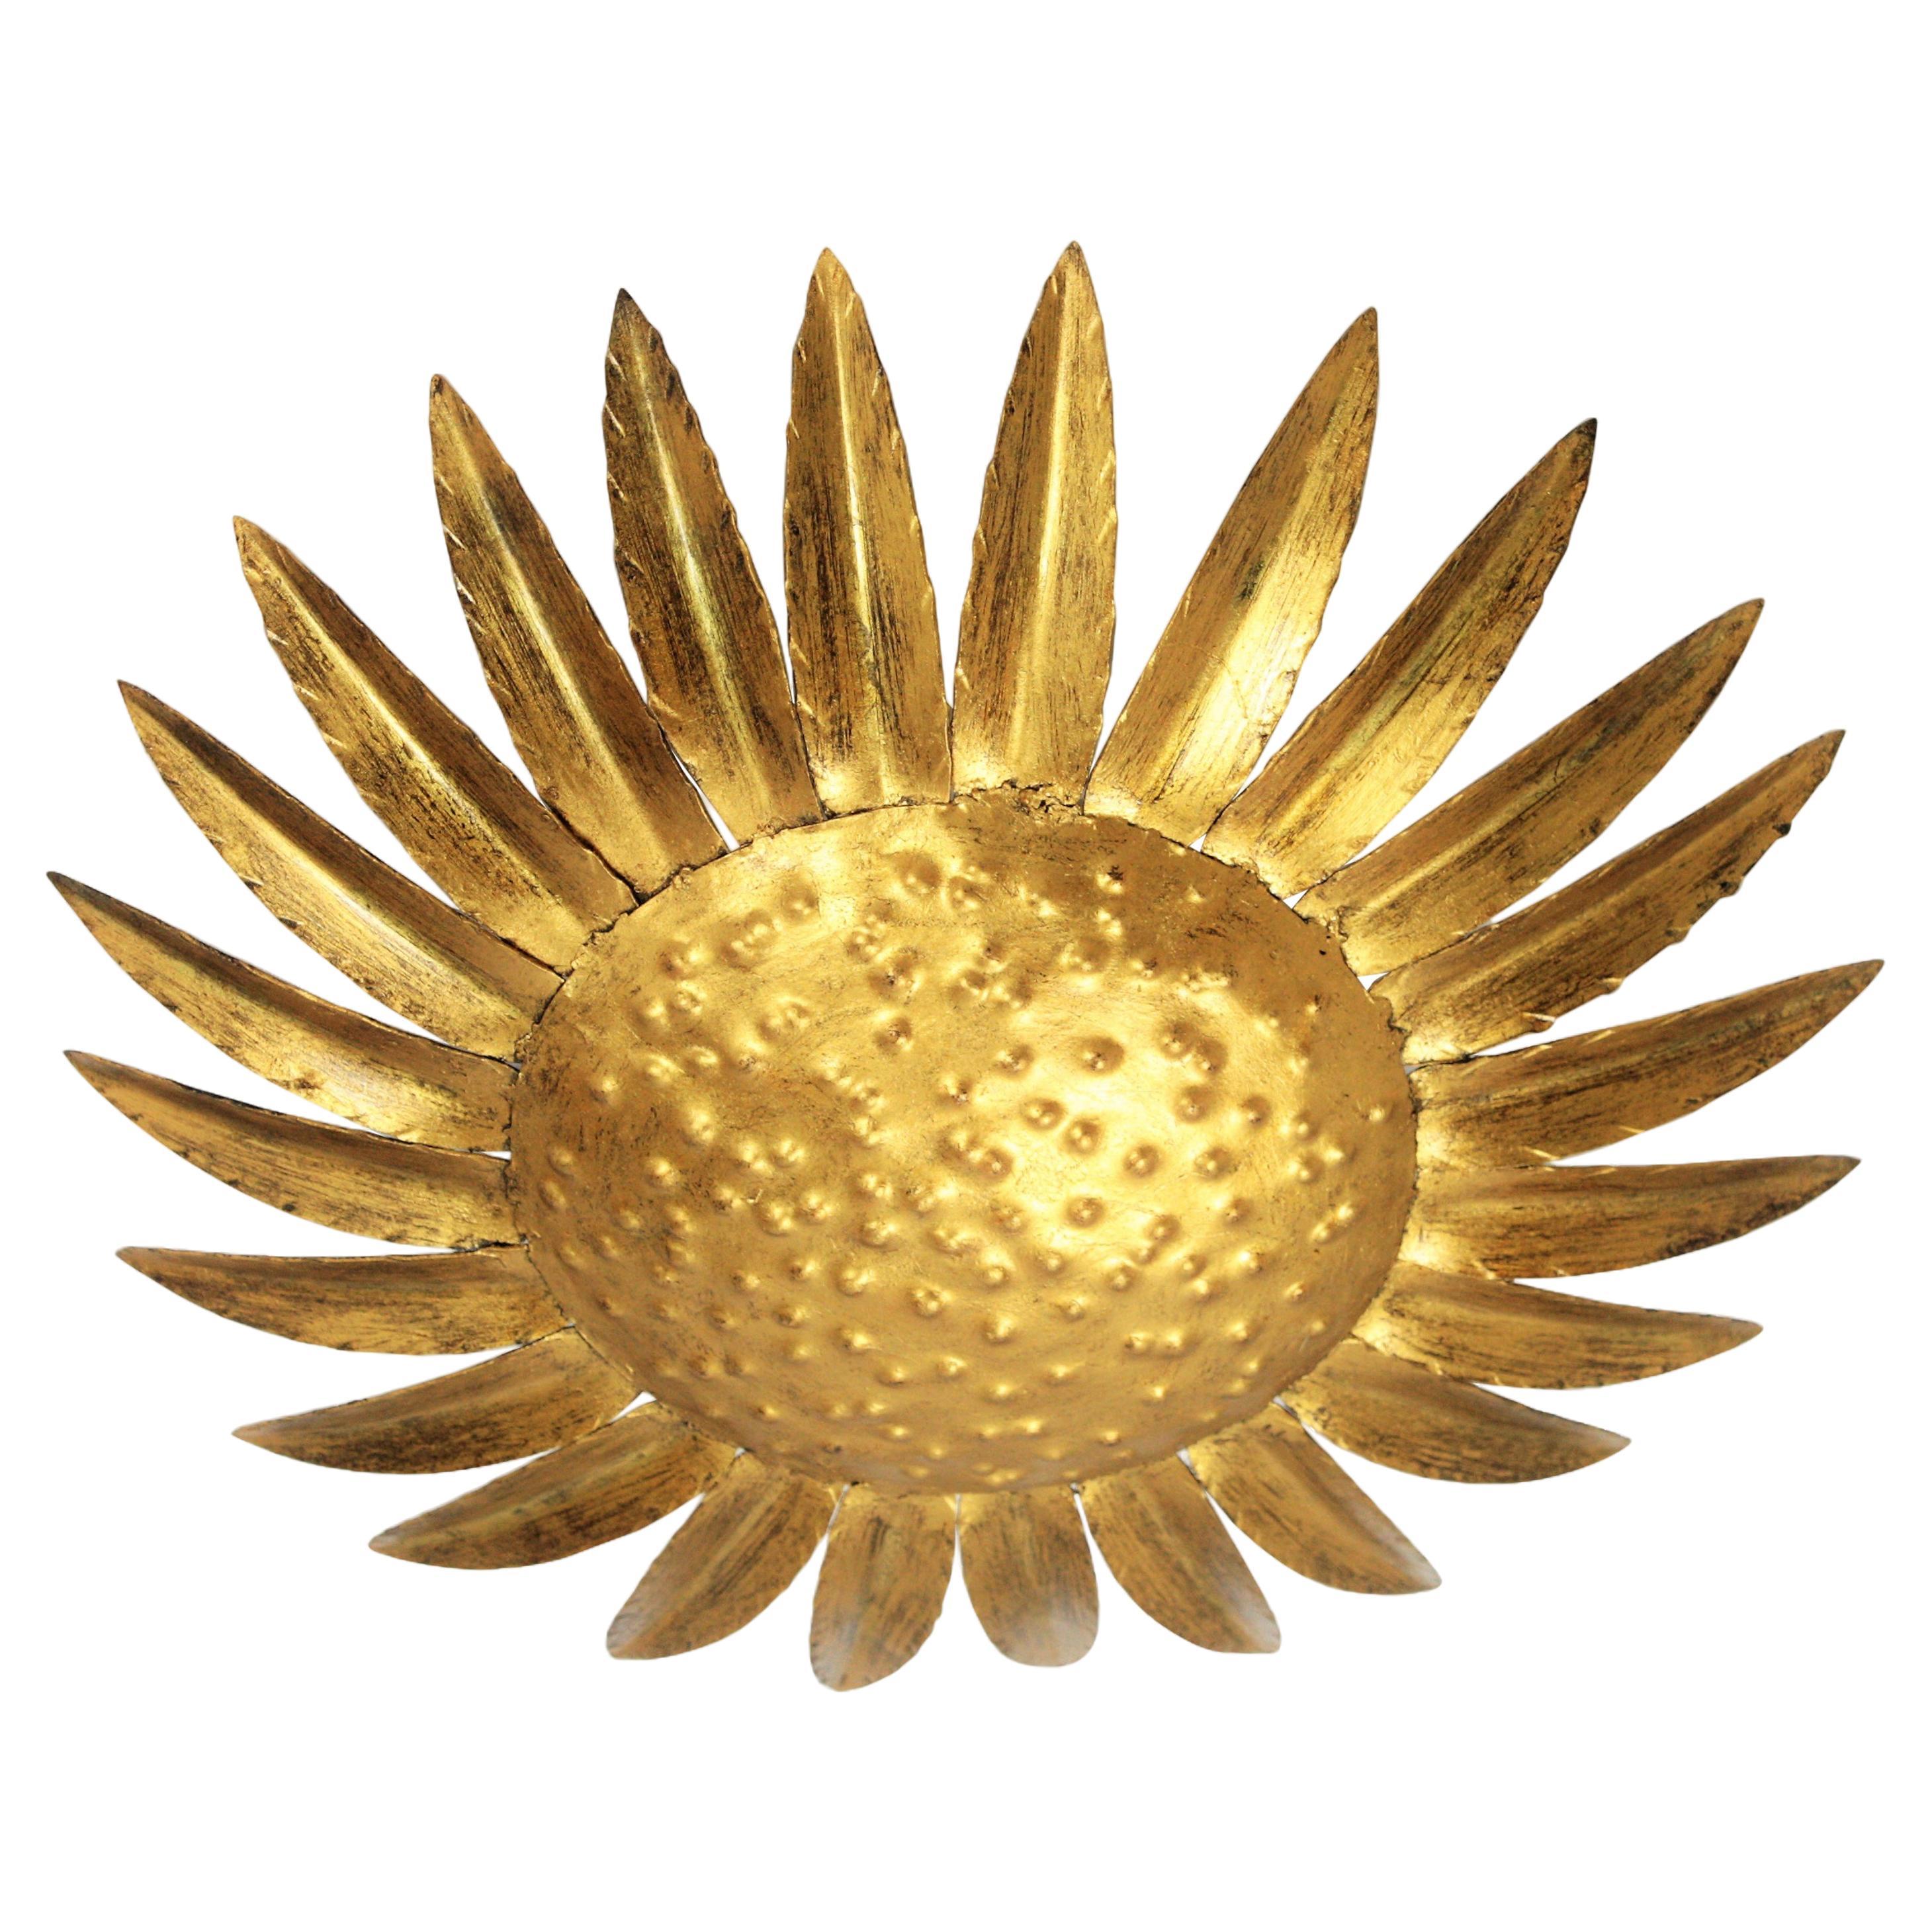 Mid-Century Modern hand-hammered iron sunburst / sunflower shaped light fixture, Spain, 1950s.
Manufactured by Ferro Art.
It has a textured hand-hammered decoration in the central part and gilded finishing.
It can work as a ceiling light fixture or